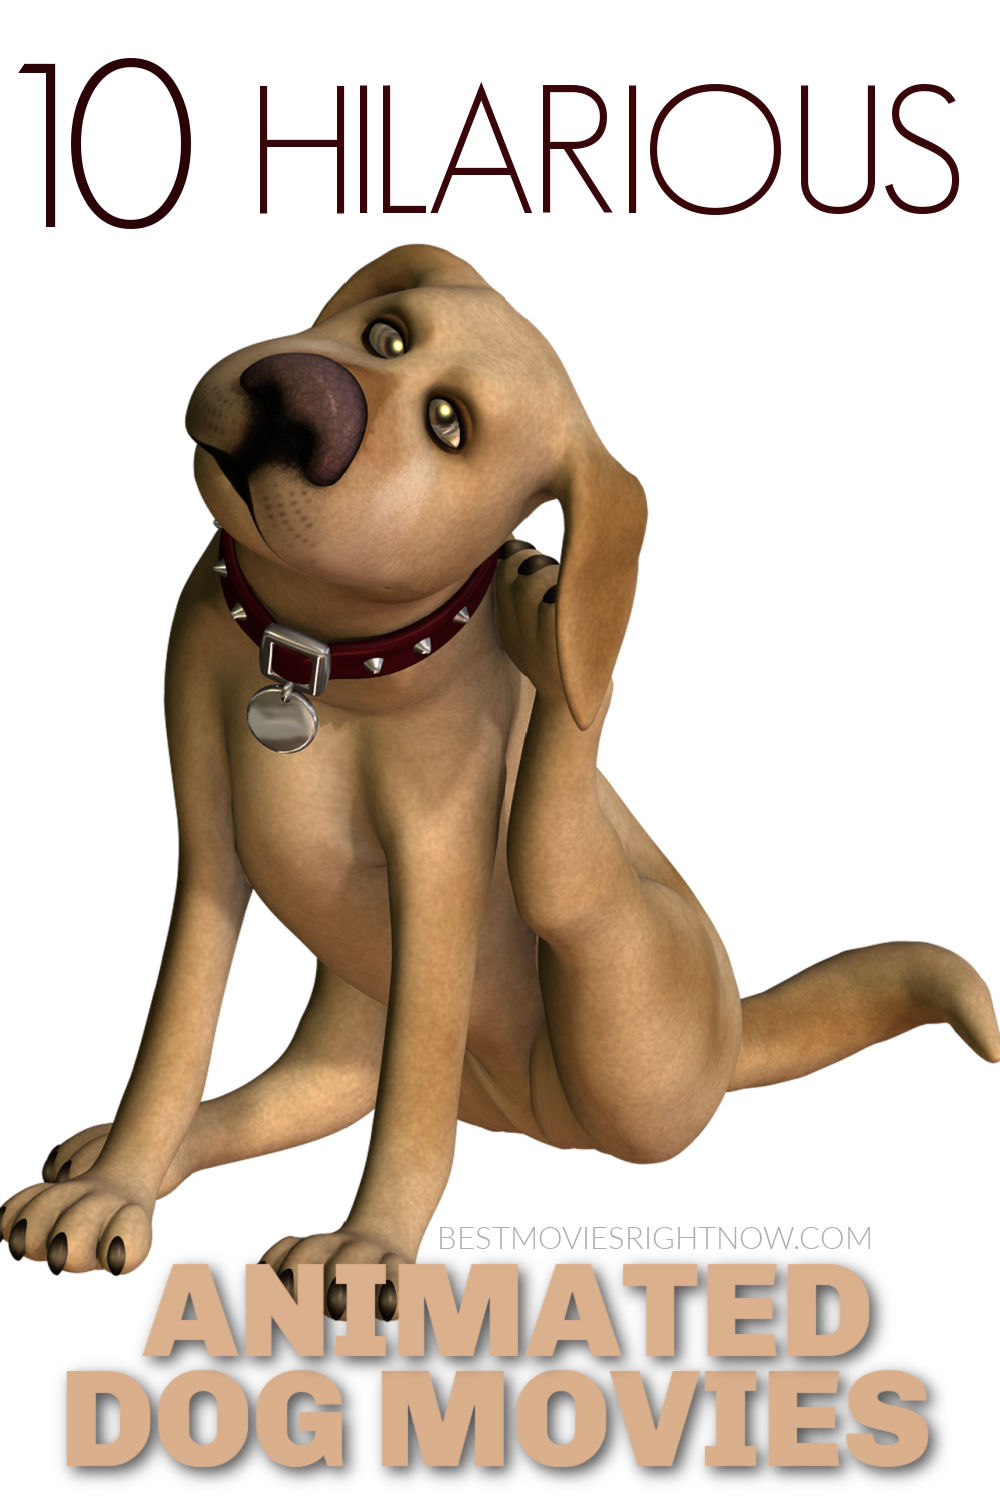 10 Hilarious Dog Cartoon Movies - Best Movies Right Now